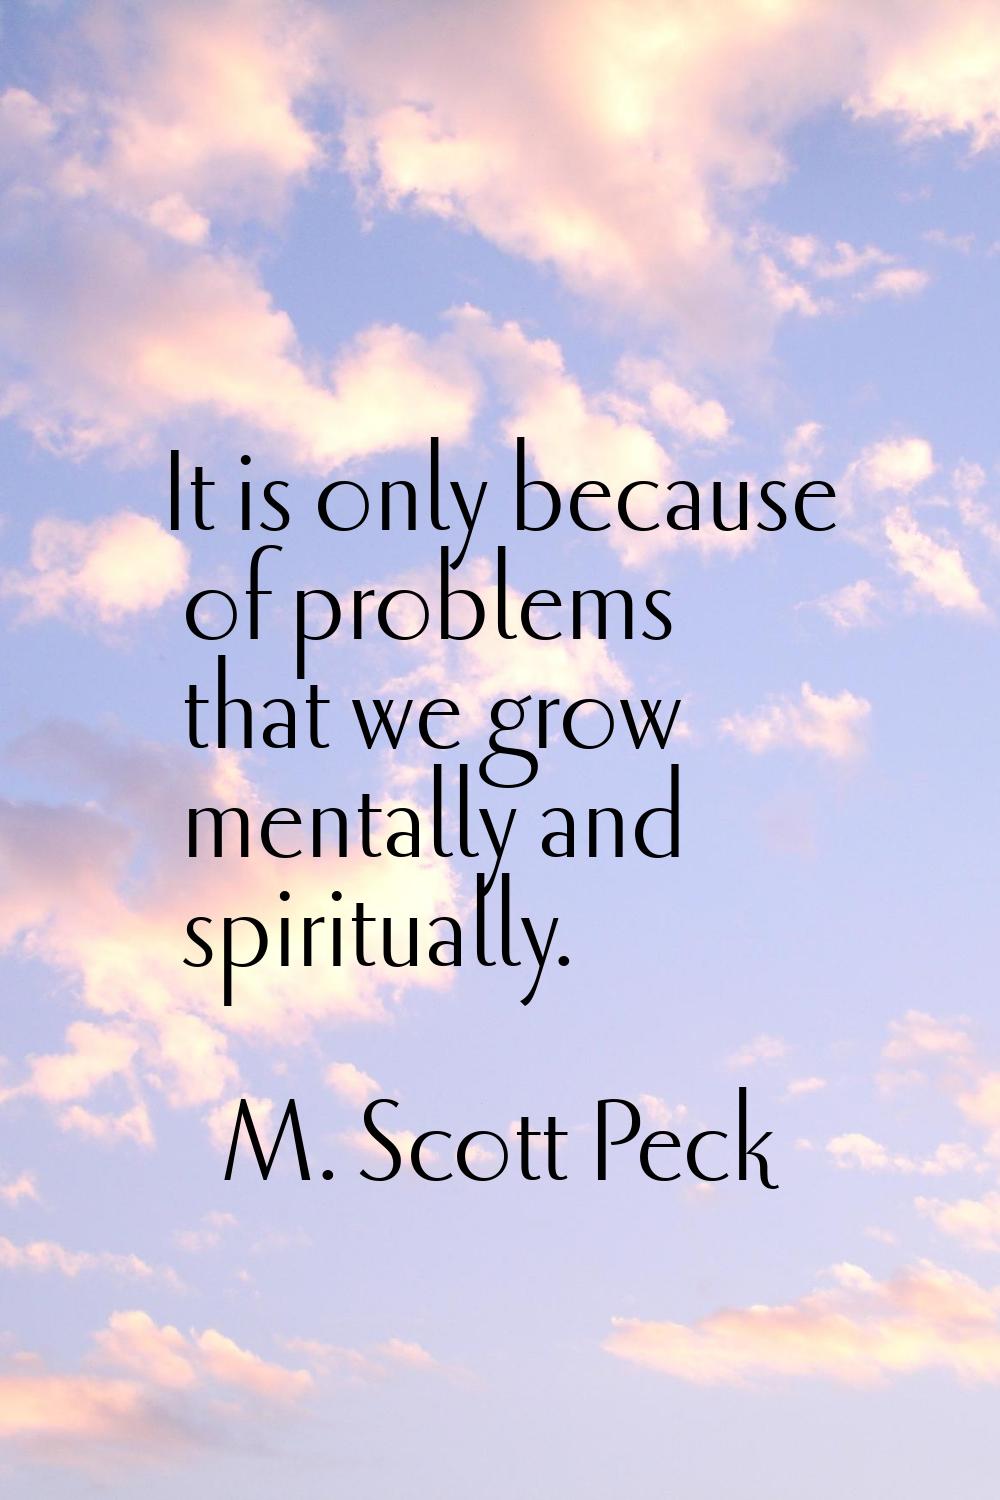 It is only because of problems that we grow mentally and spiritually.